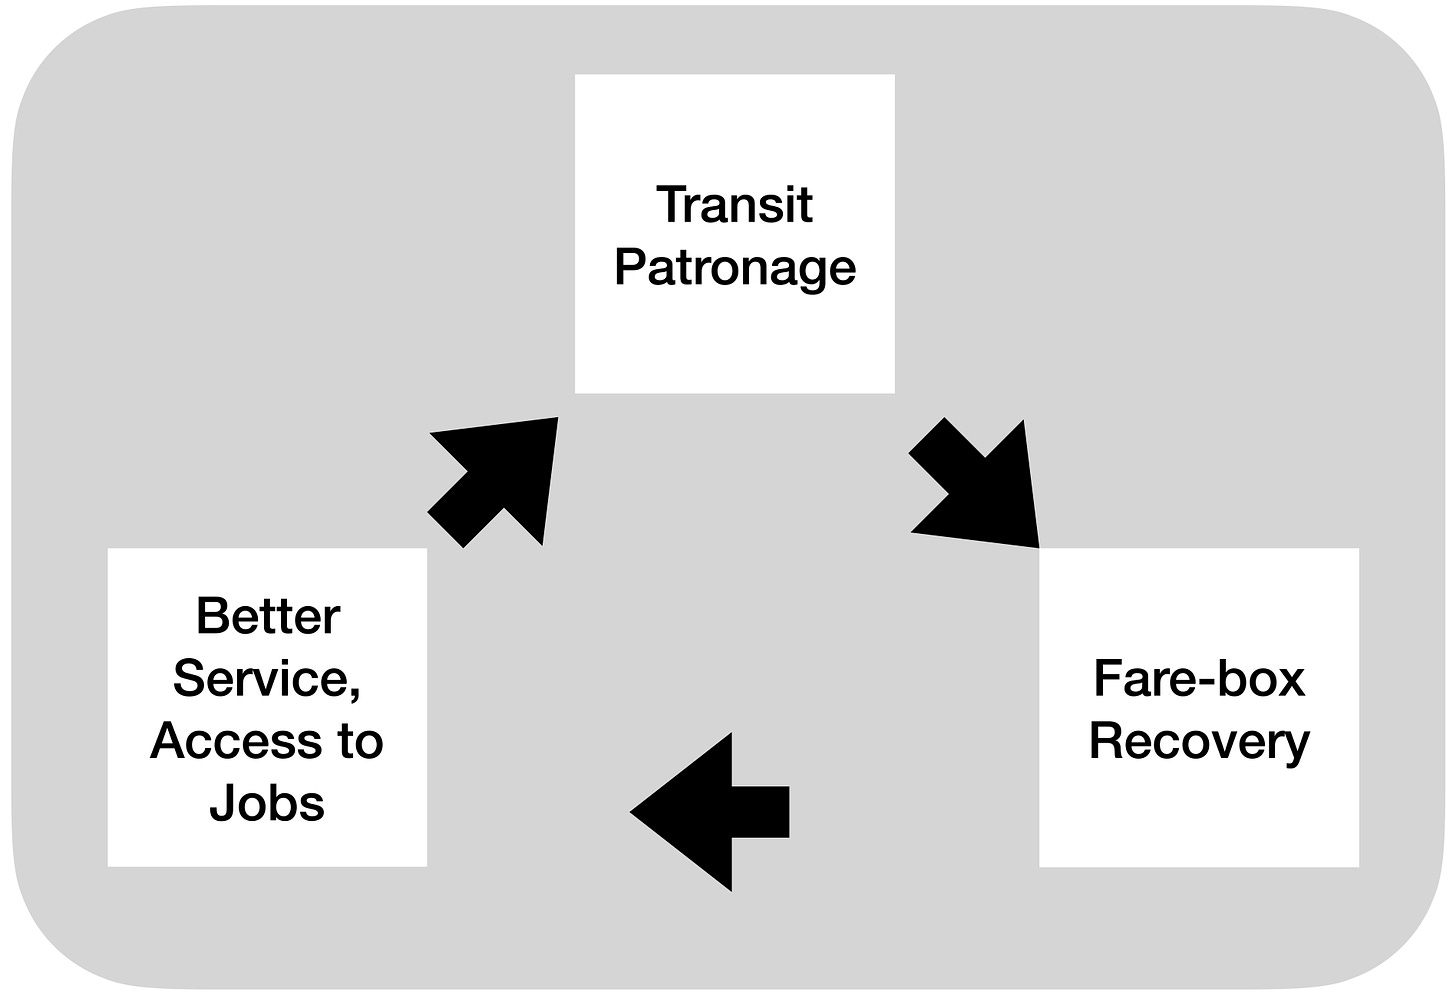 More transit patronage leads to more farebox recovery leads to better service and access to jobs which leads to more patronage